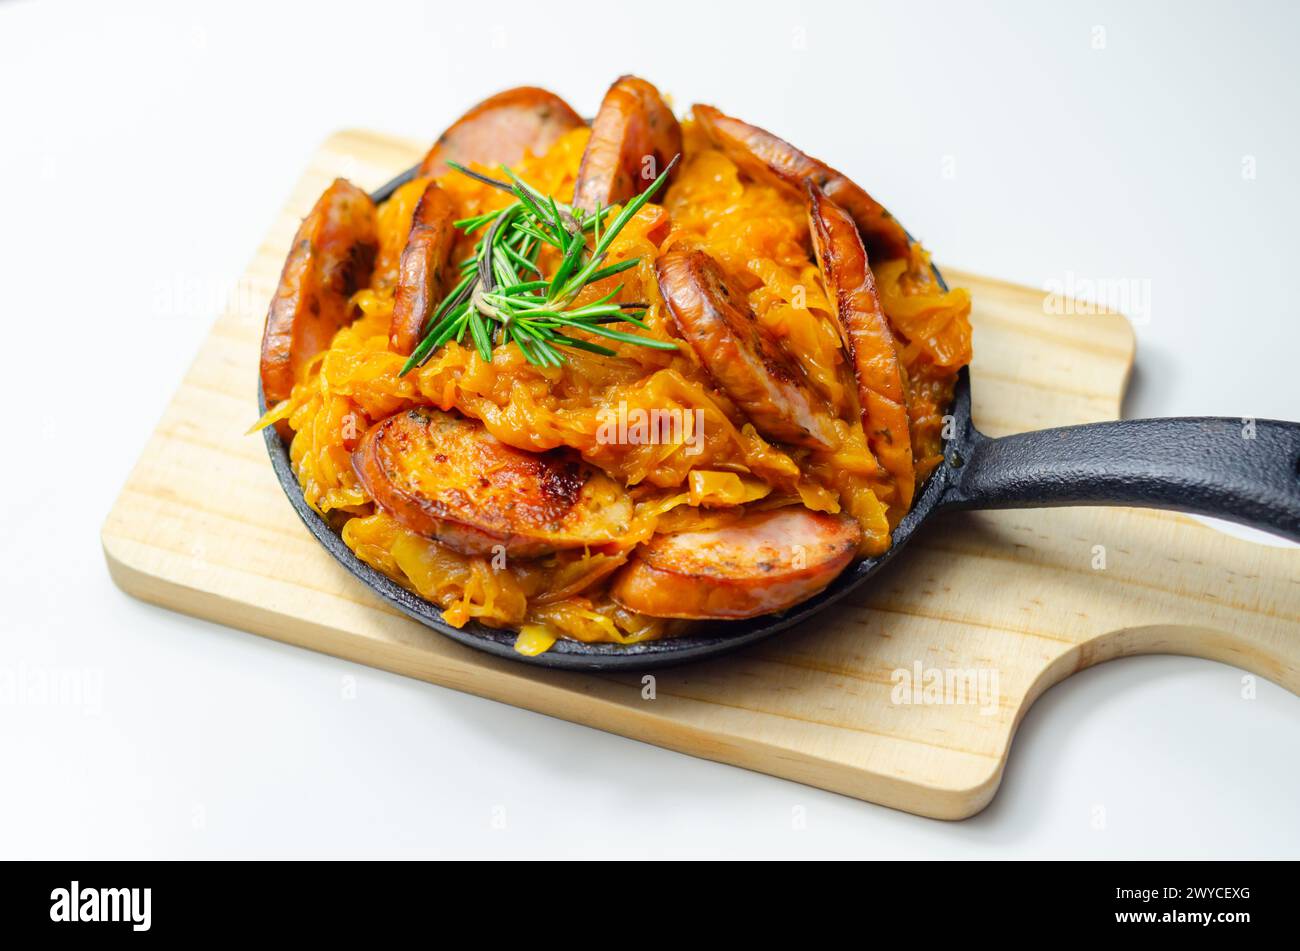 Traditional Polish dish called bigos made of sauerkraut, sausage and mushrooms, food served warm in a cast iron pan Stock Photo